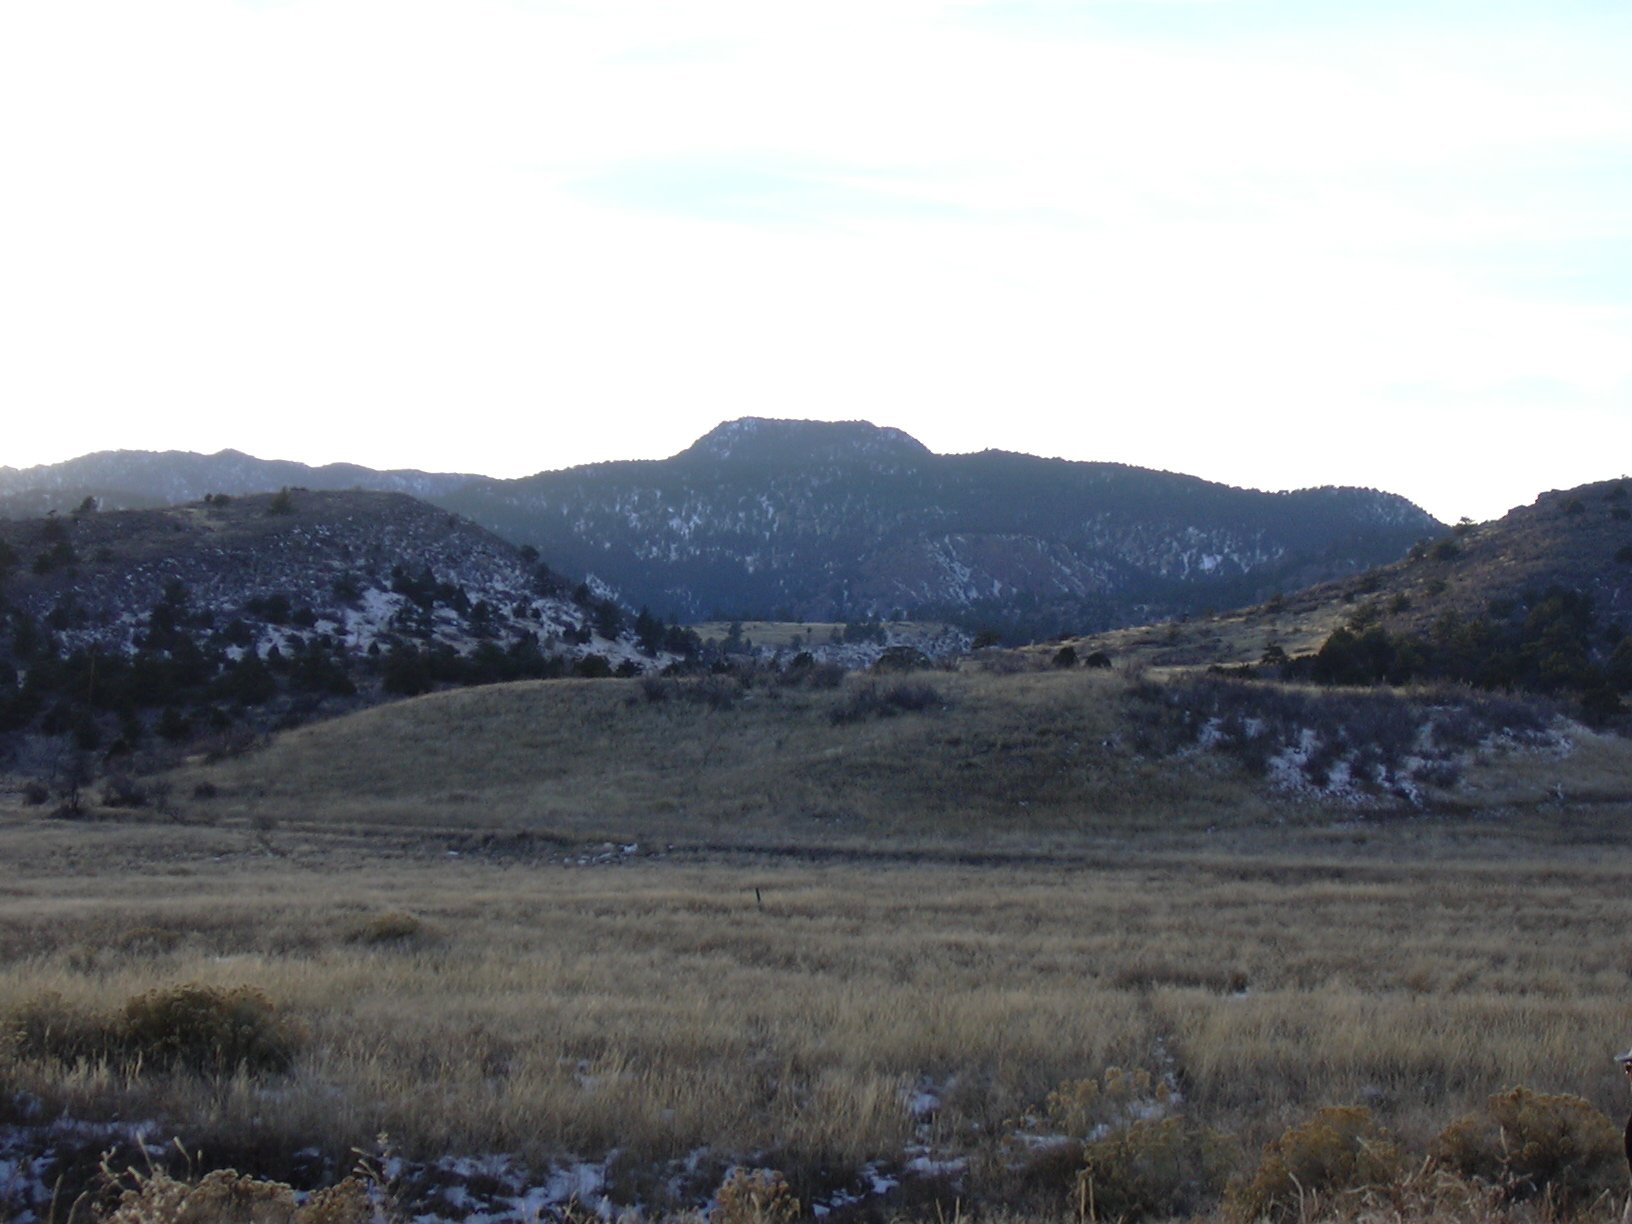 Coffintop Mountain (8049 ft) from Hall Ranch parking
area, 11/25/07